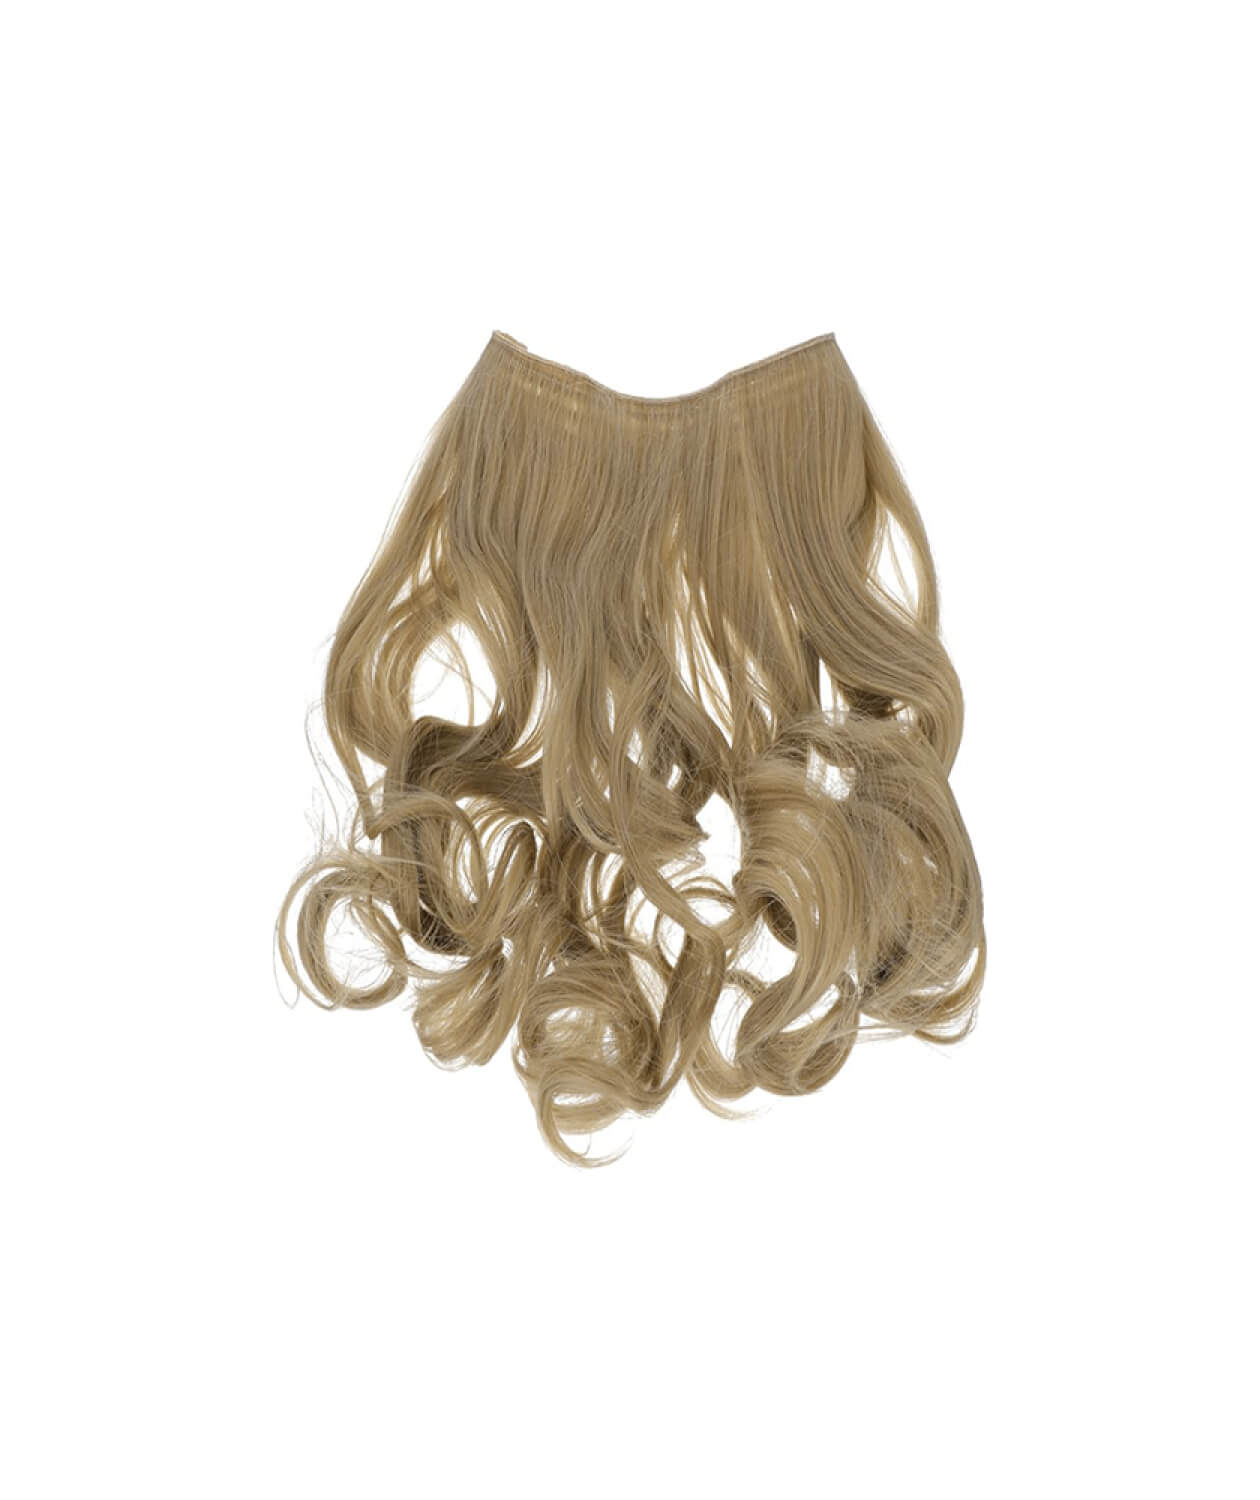 (Product 20) Sample - Wig and Accessories For Sale